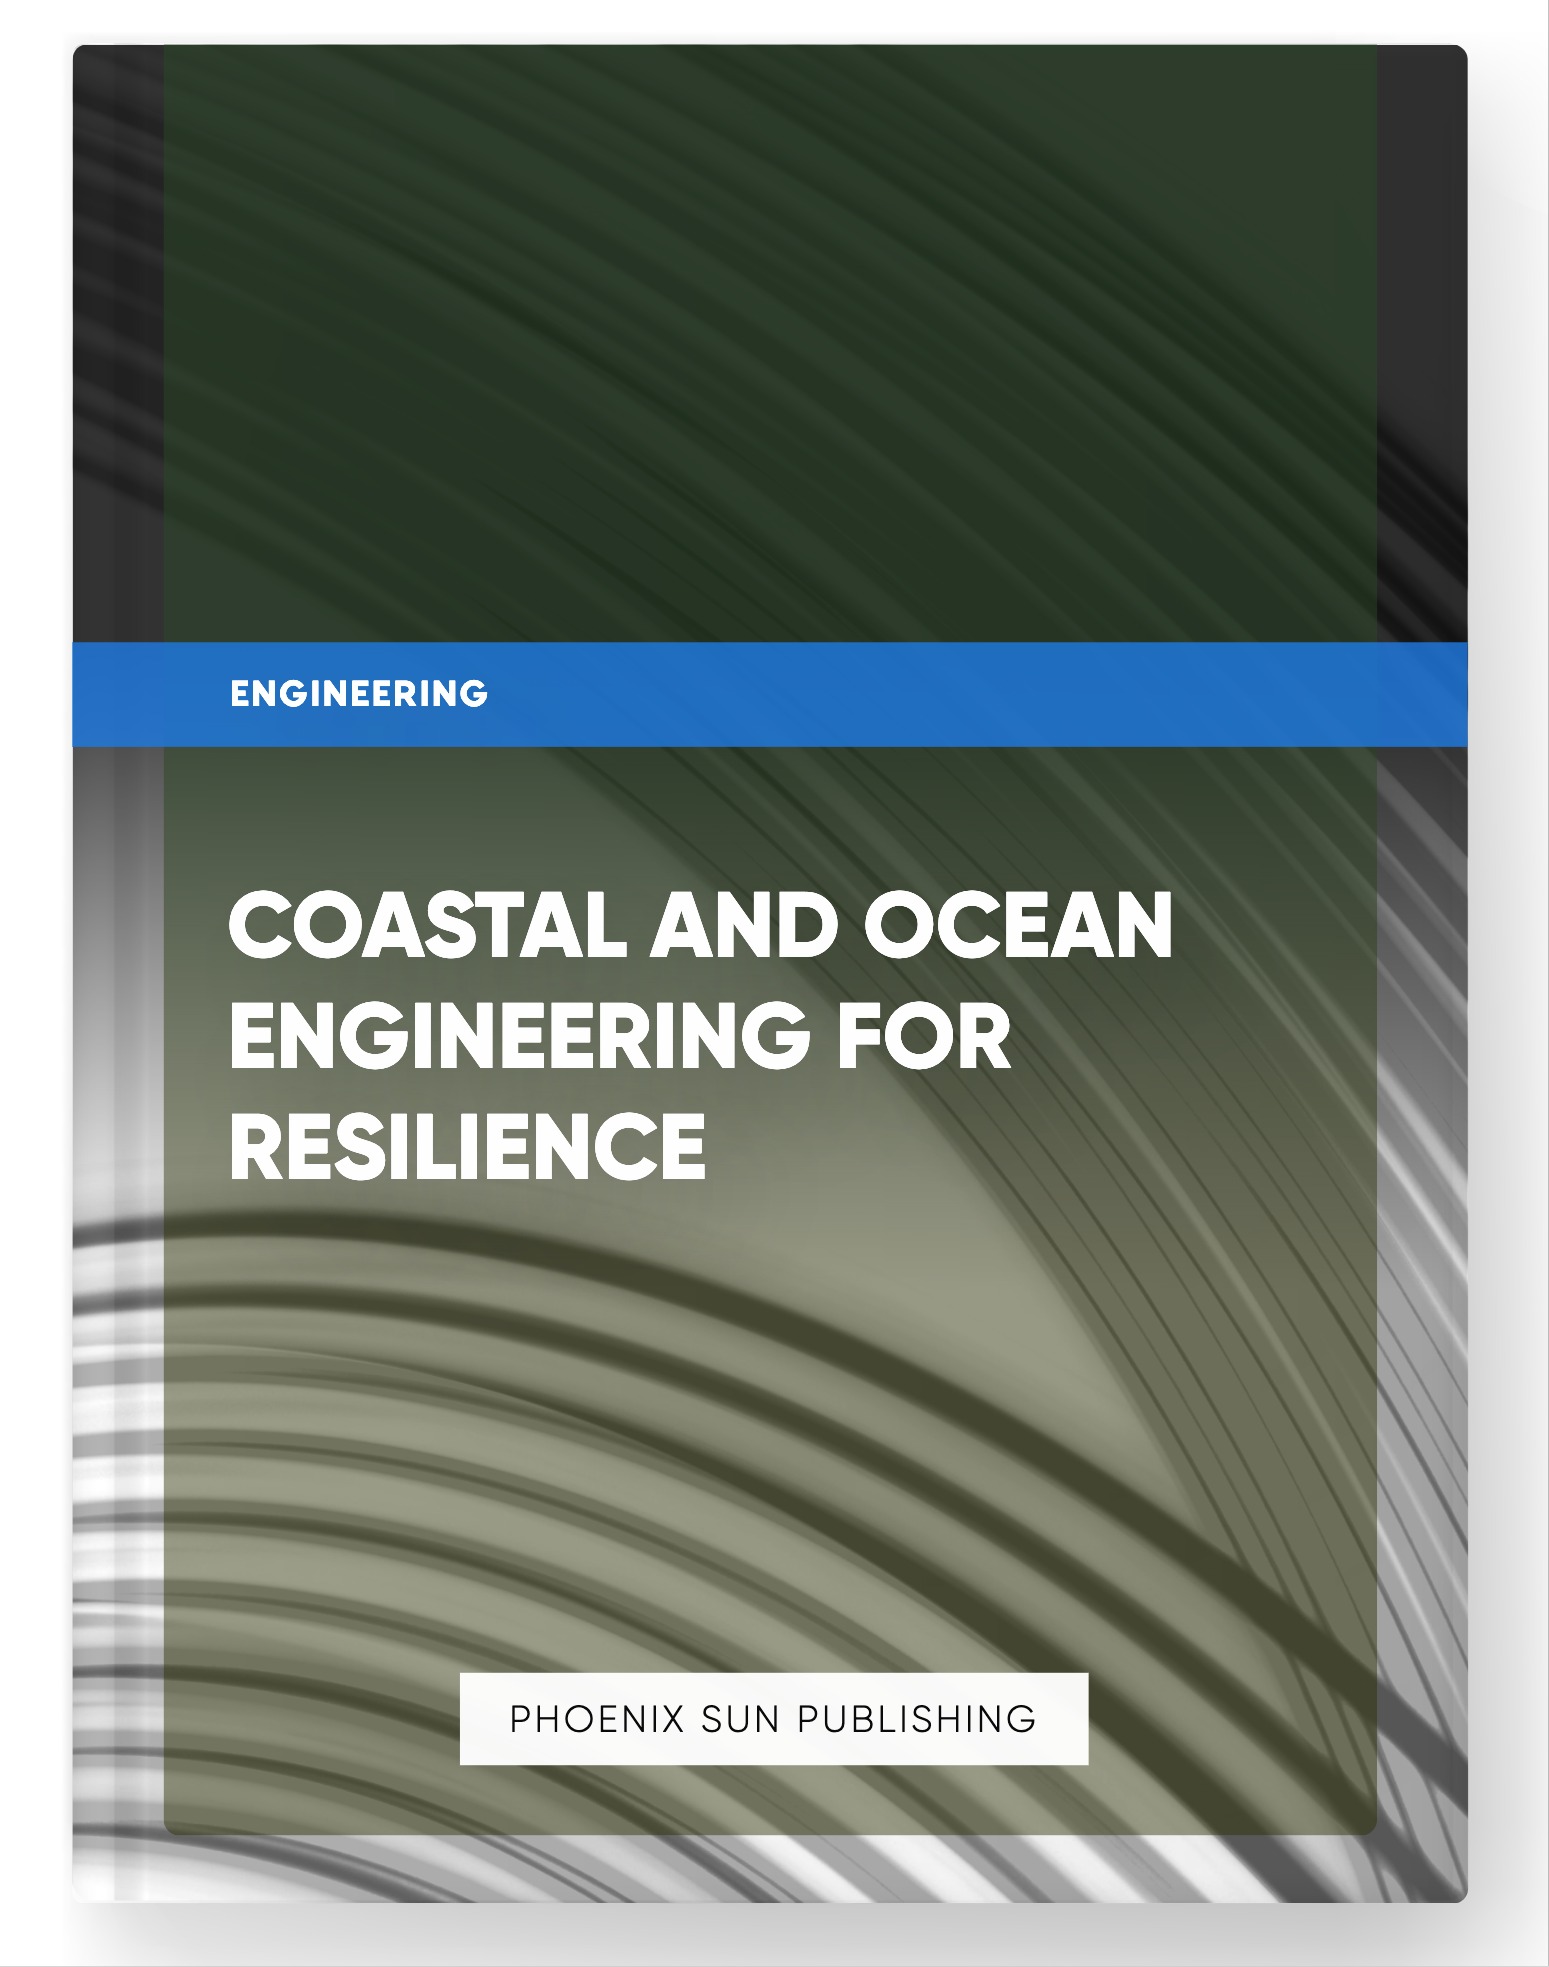 Coastal and Ocean Engineering for Resilience